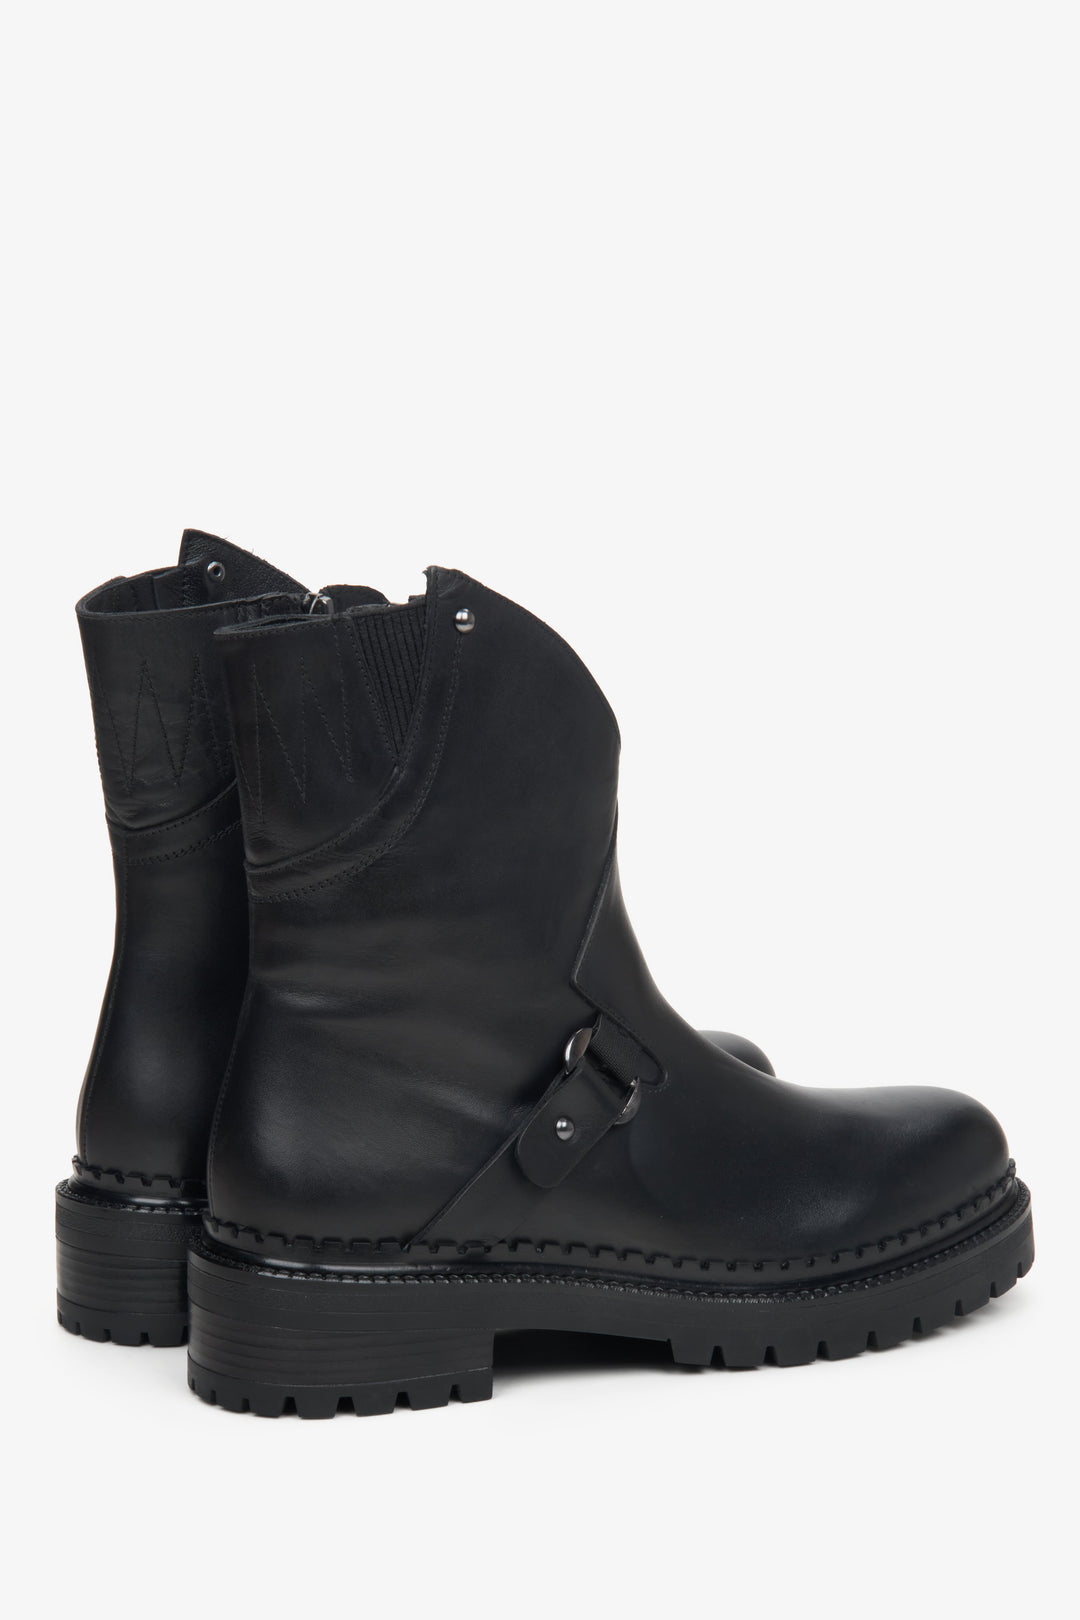 Women's leather ankle boots in black Estro - presentation of the shoeline.